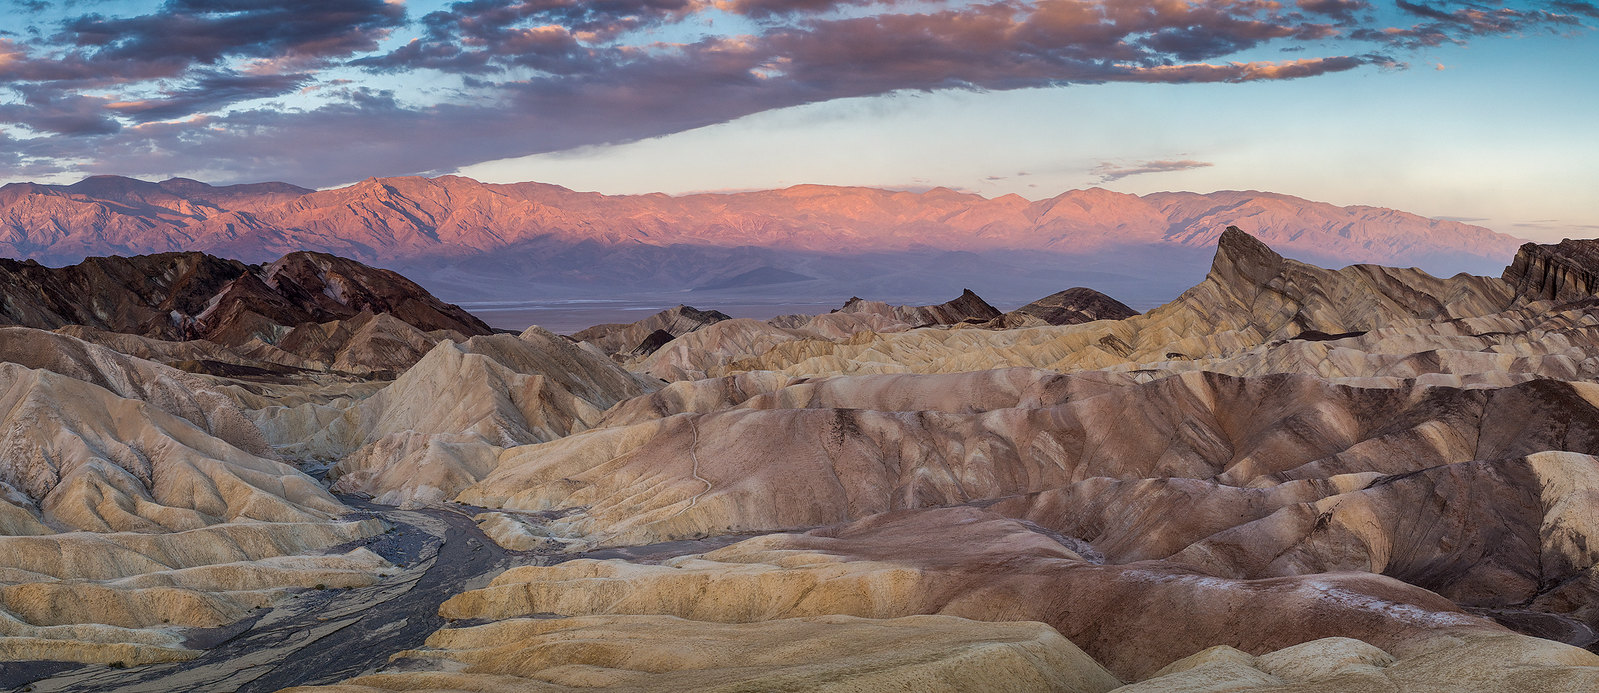 photo of Death Valley